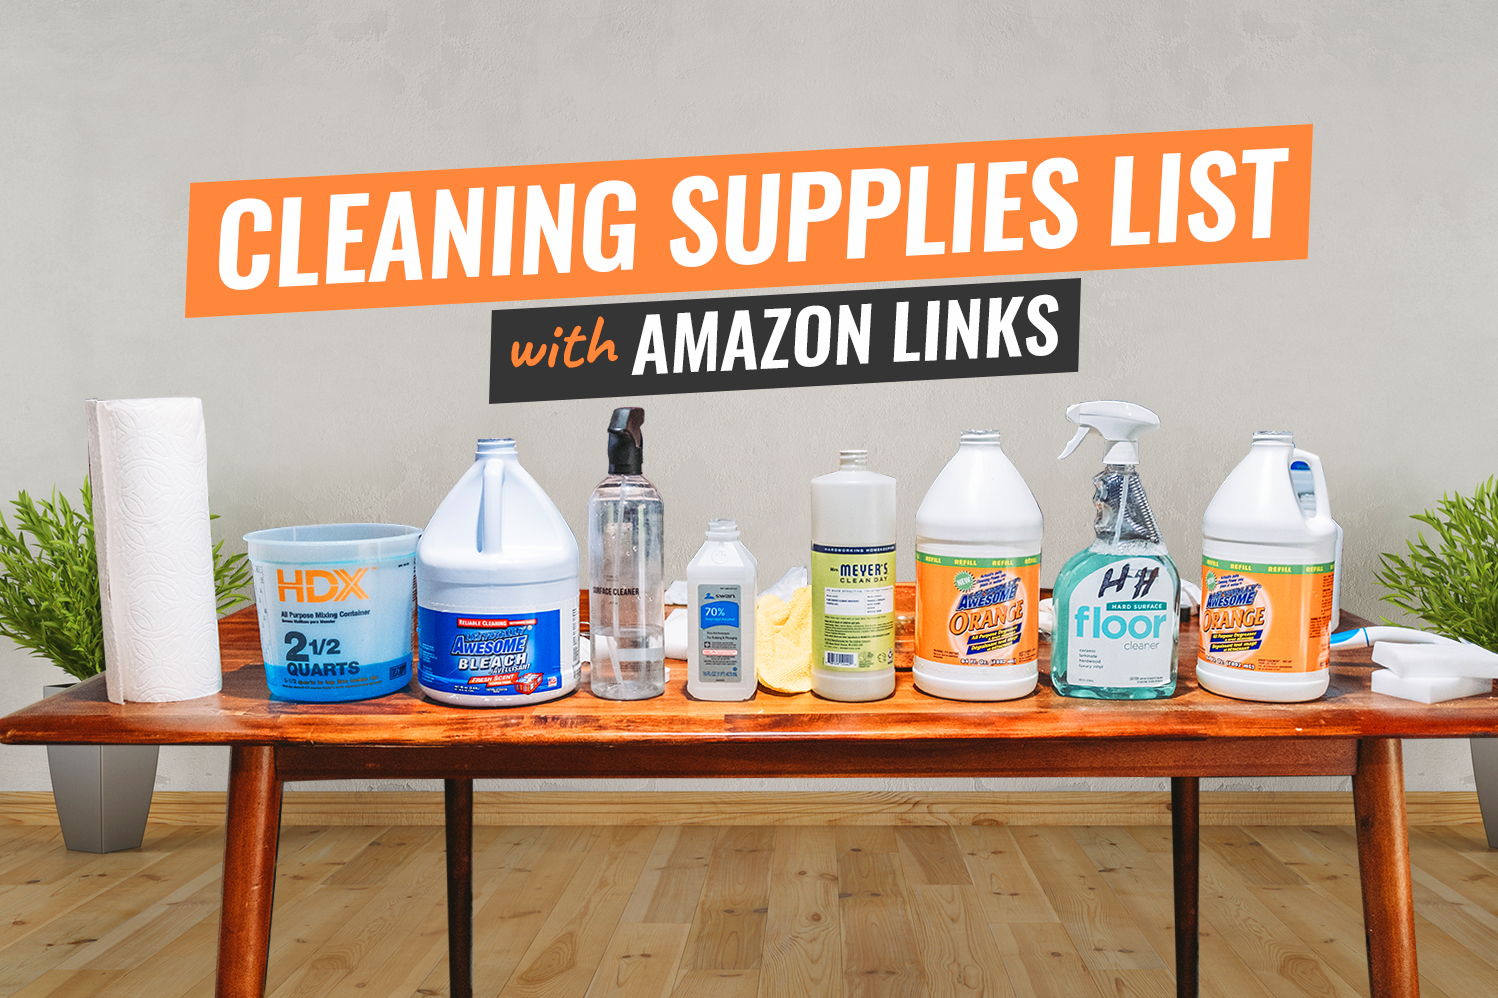 https://c5ab8b64.flyingcdn.com/wp-content/uploads/2022/11/Cleaning-supplies-list.png